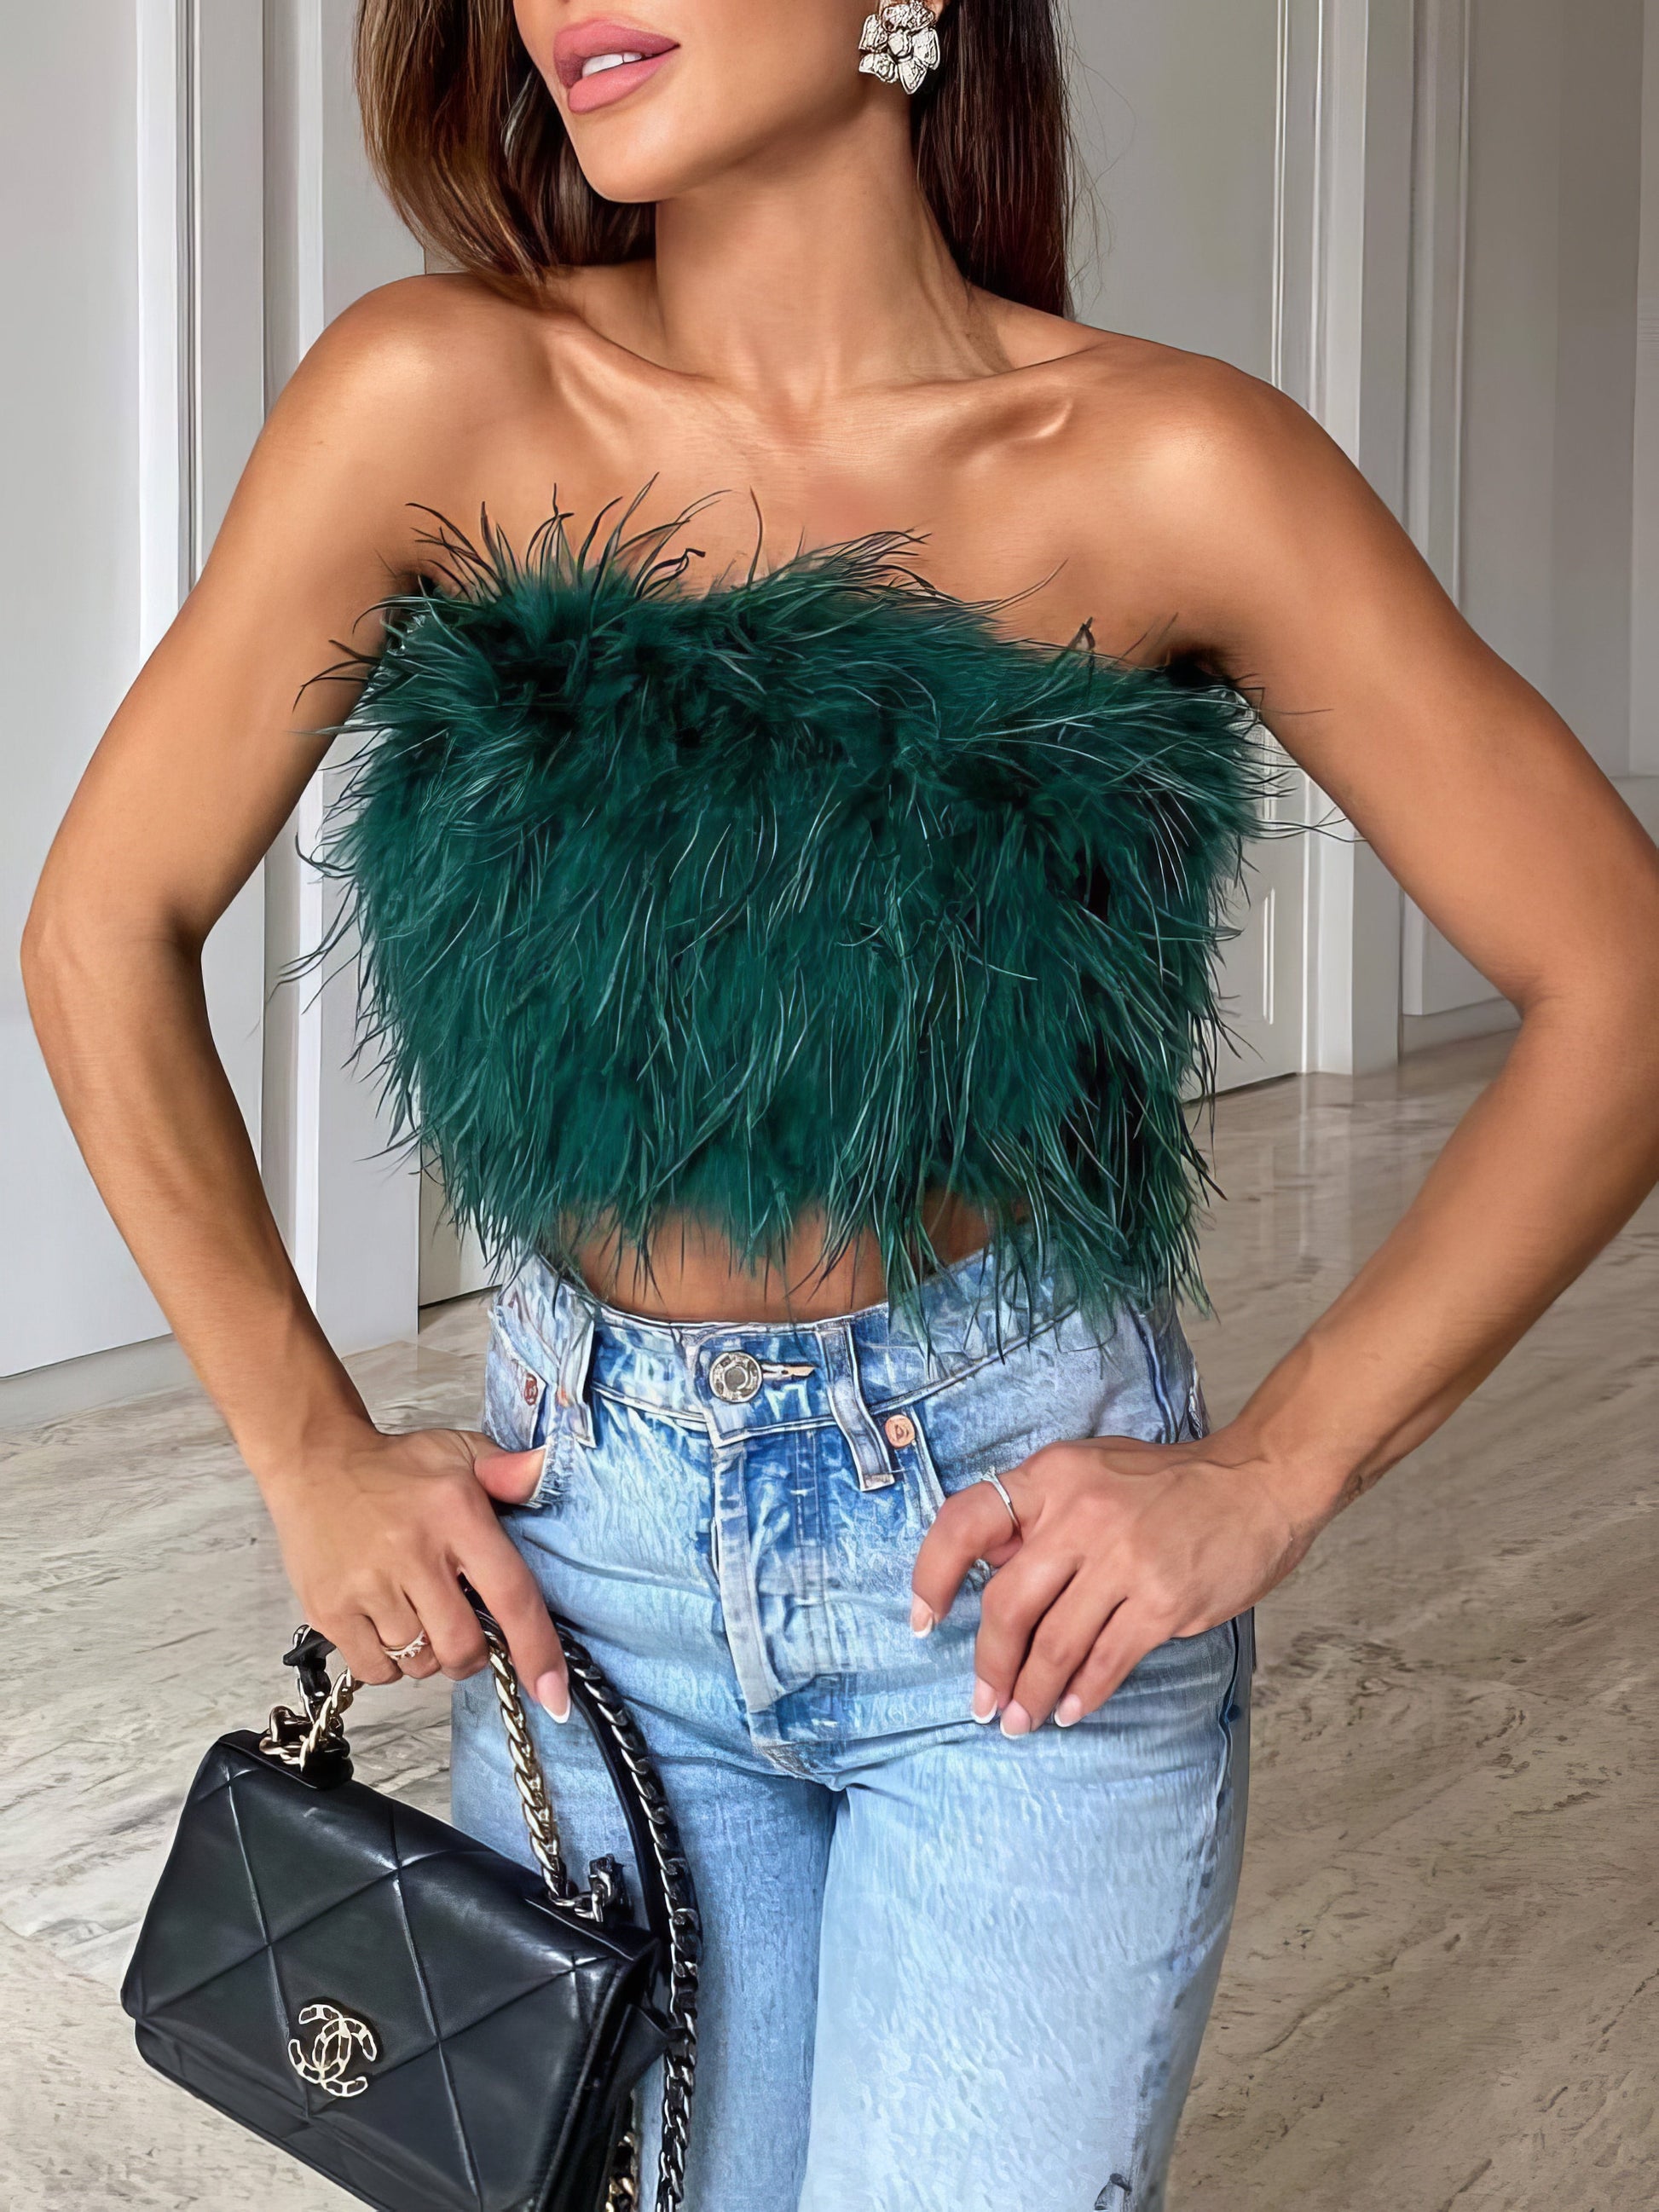 Tank Tops - Tops Feather Tube Top Sleeveless Tank Top - MsDressly